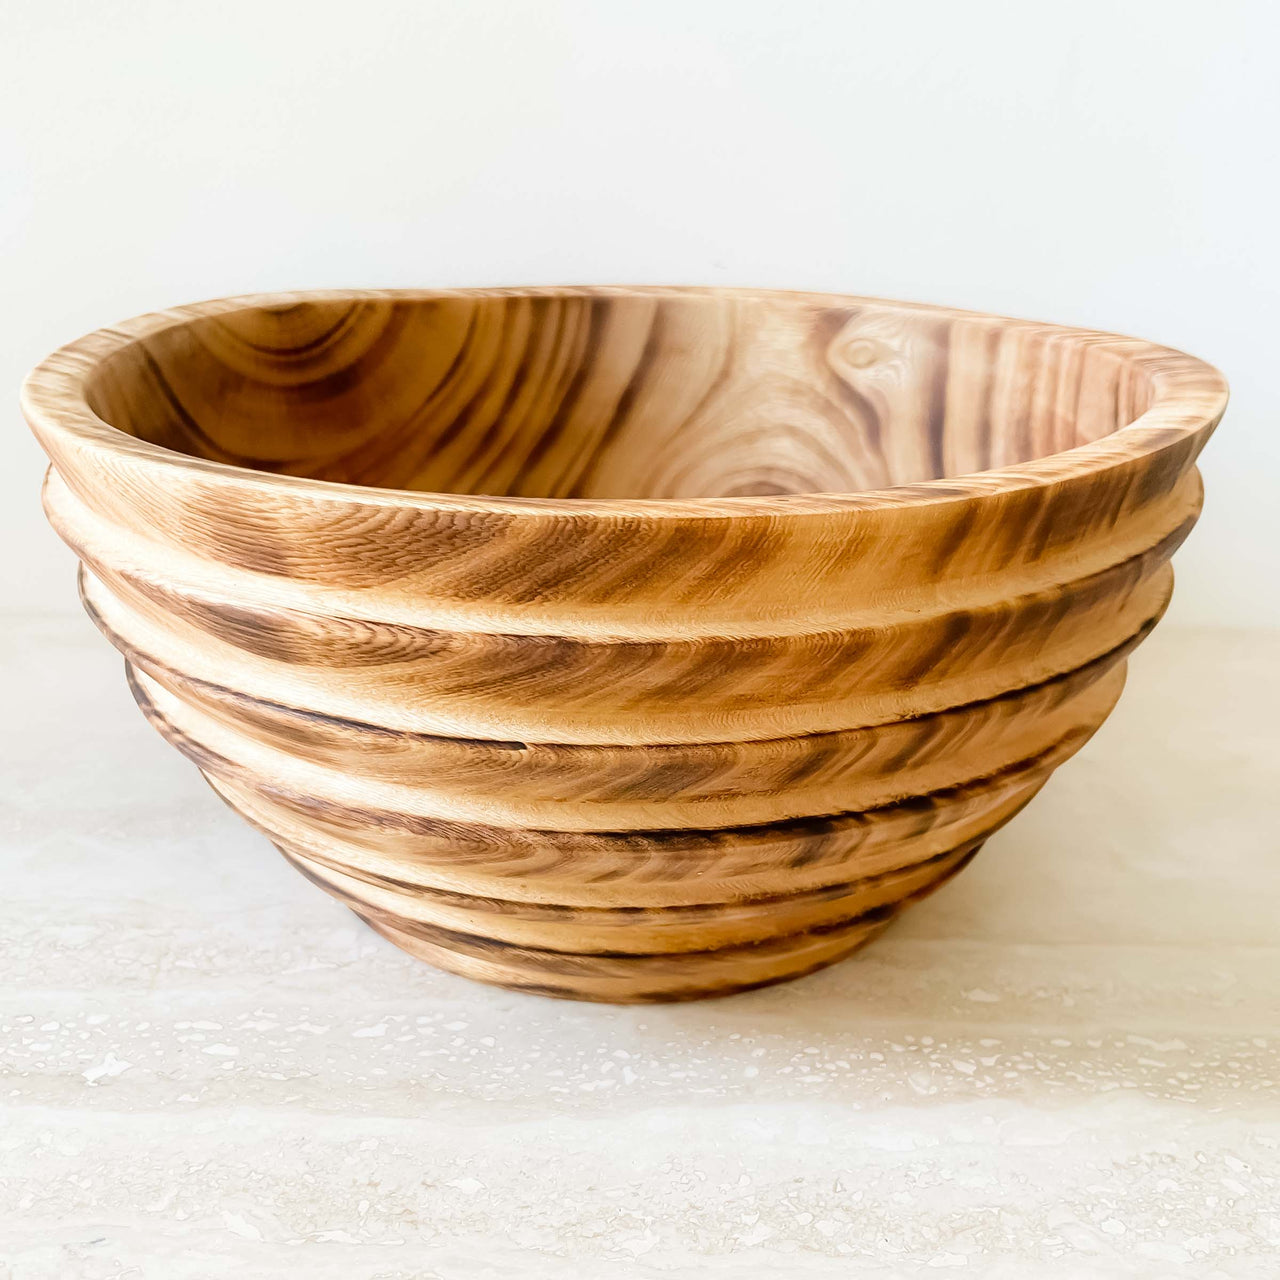 The Hive Wooden Salad Bowl